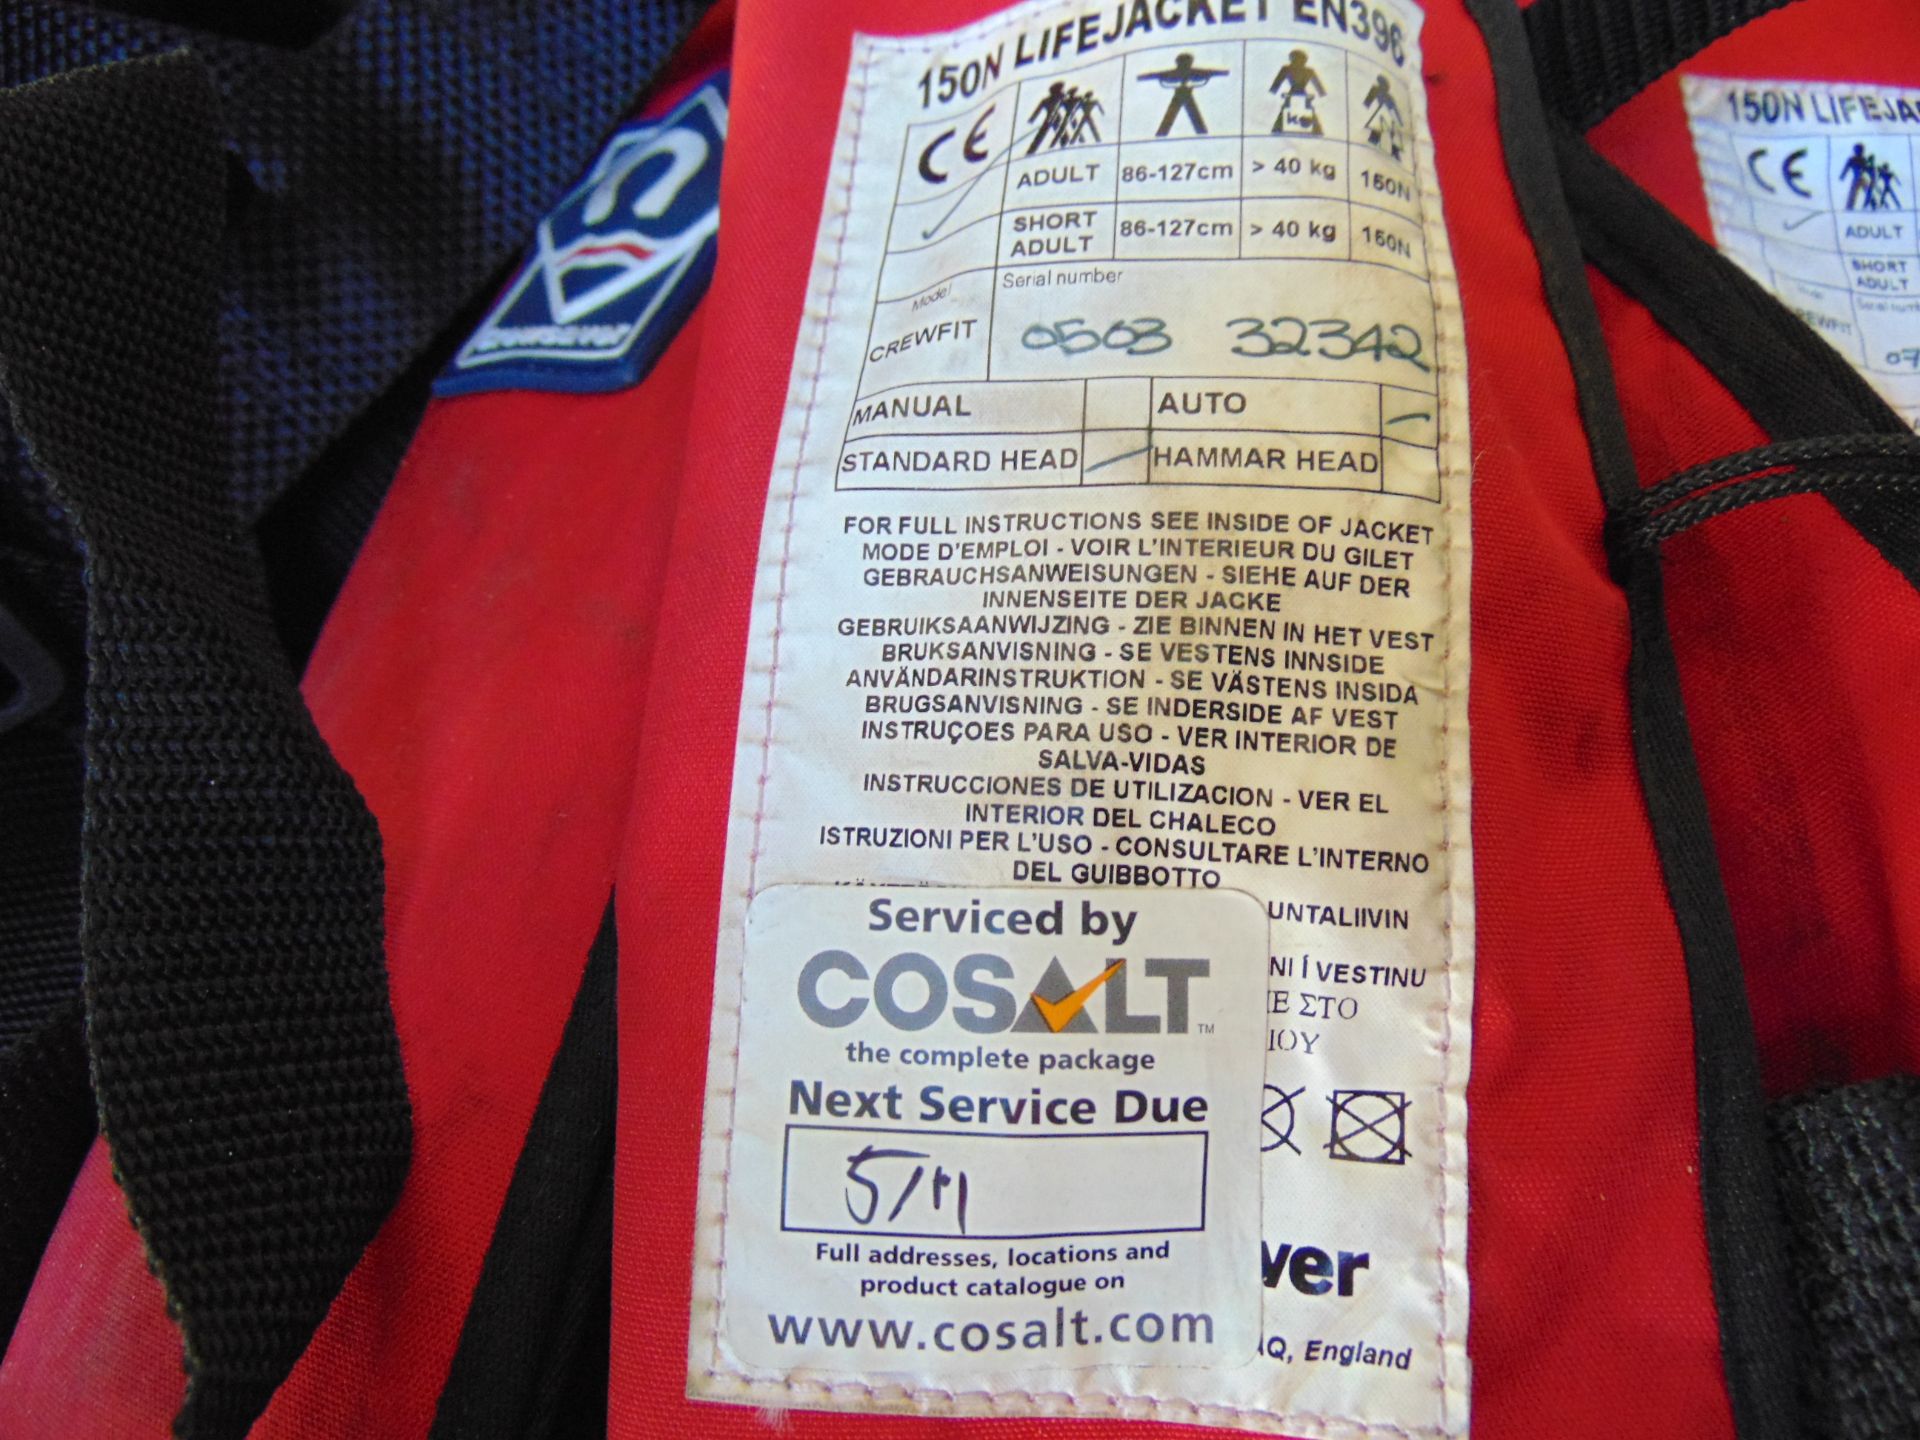 6 x Crew Saver 150 N Life Jackets from UK Fire / Rescue Services - Image 3 of 6